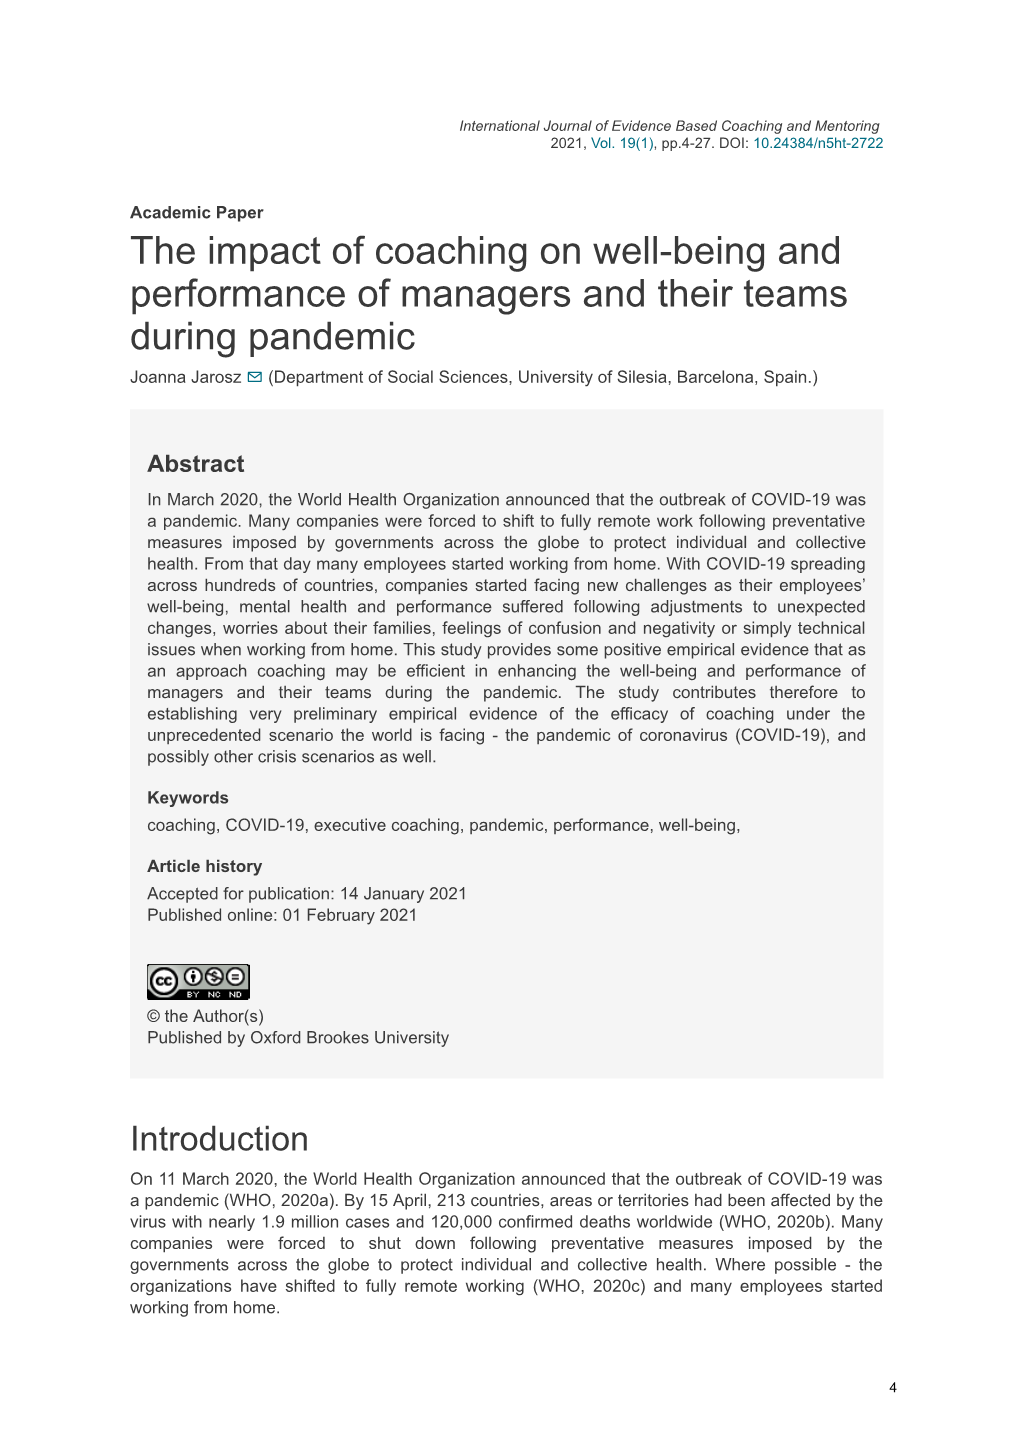 The Impact of Coaching on Well-Being and Performance of Managers And